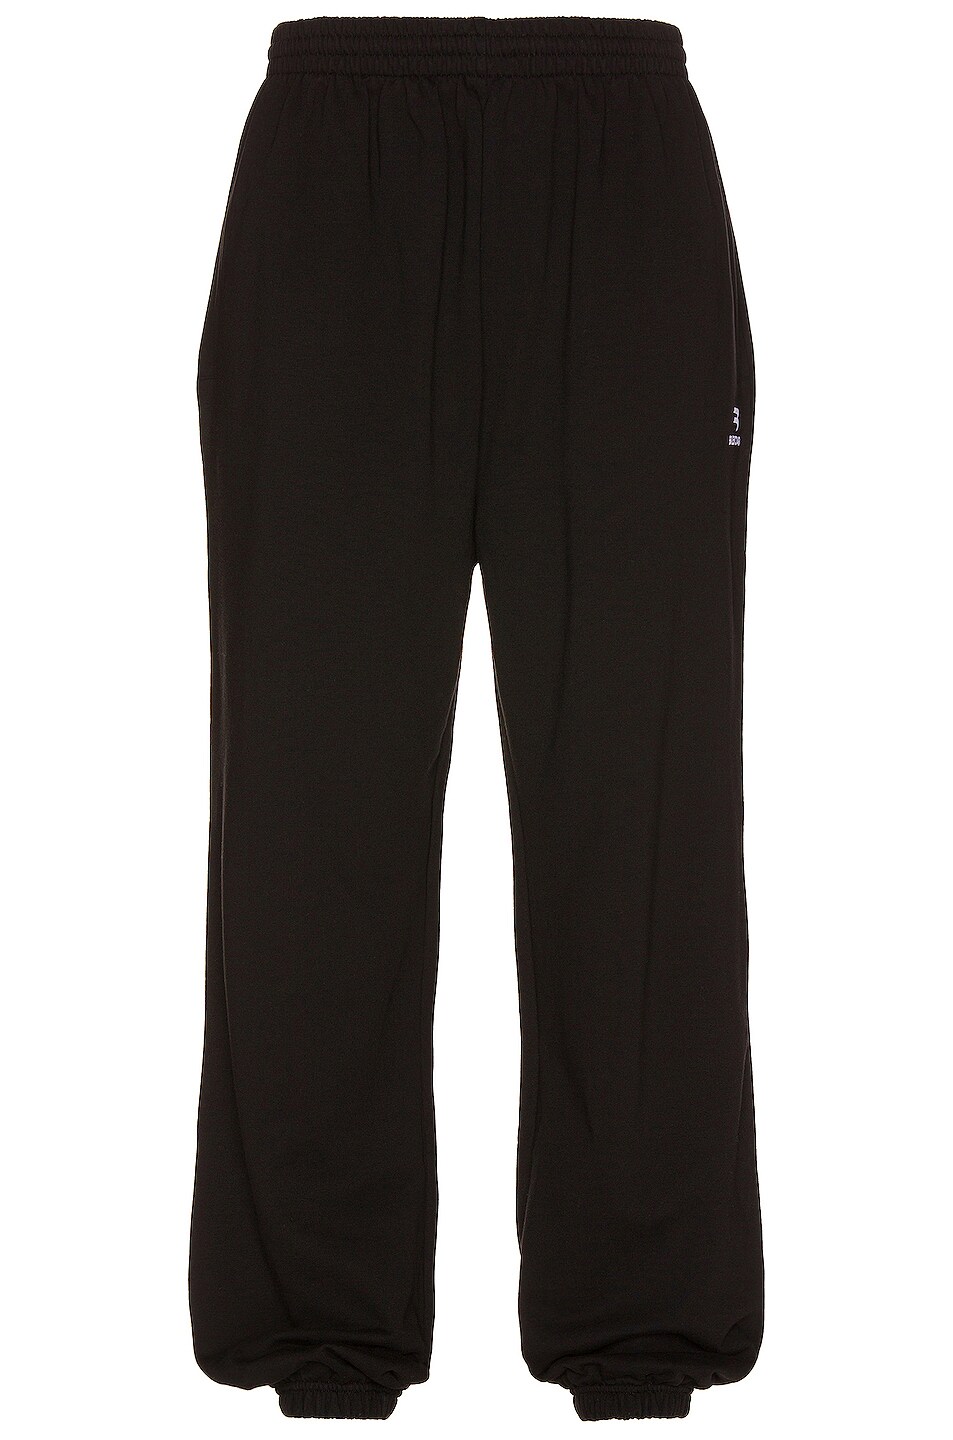 Image 1 of Balenciaga Stretch Knee Pants in Black & White